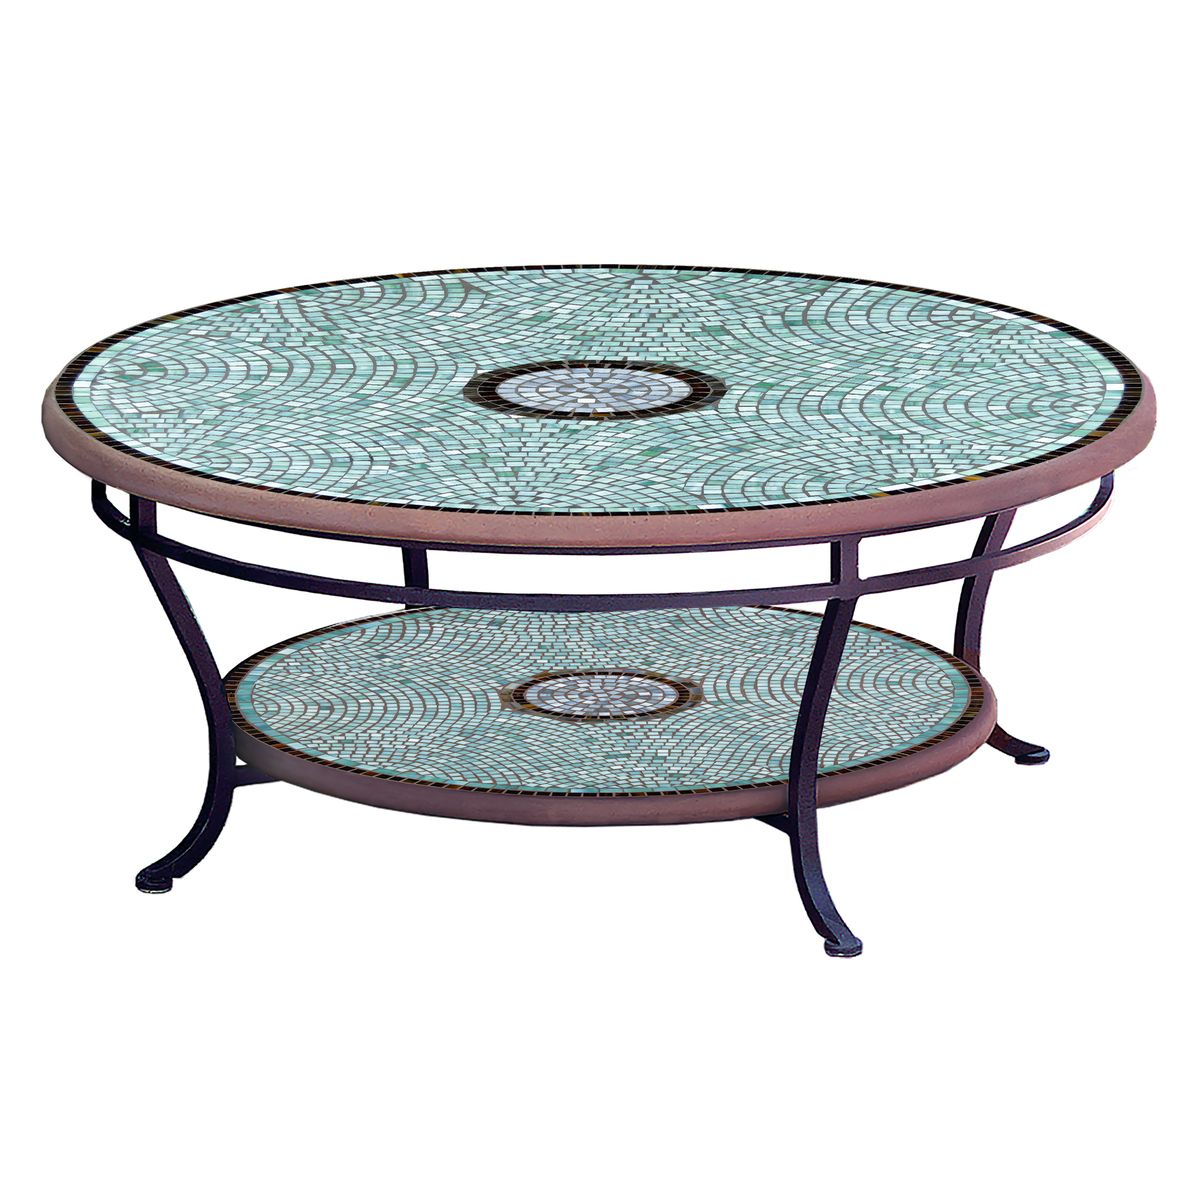 Jade Glass Mosaic Coffee Table - Tiered-Iron Accents